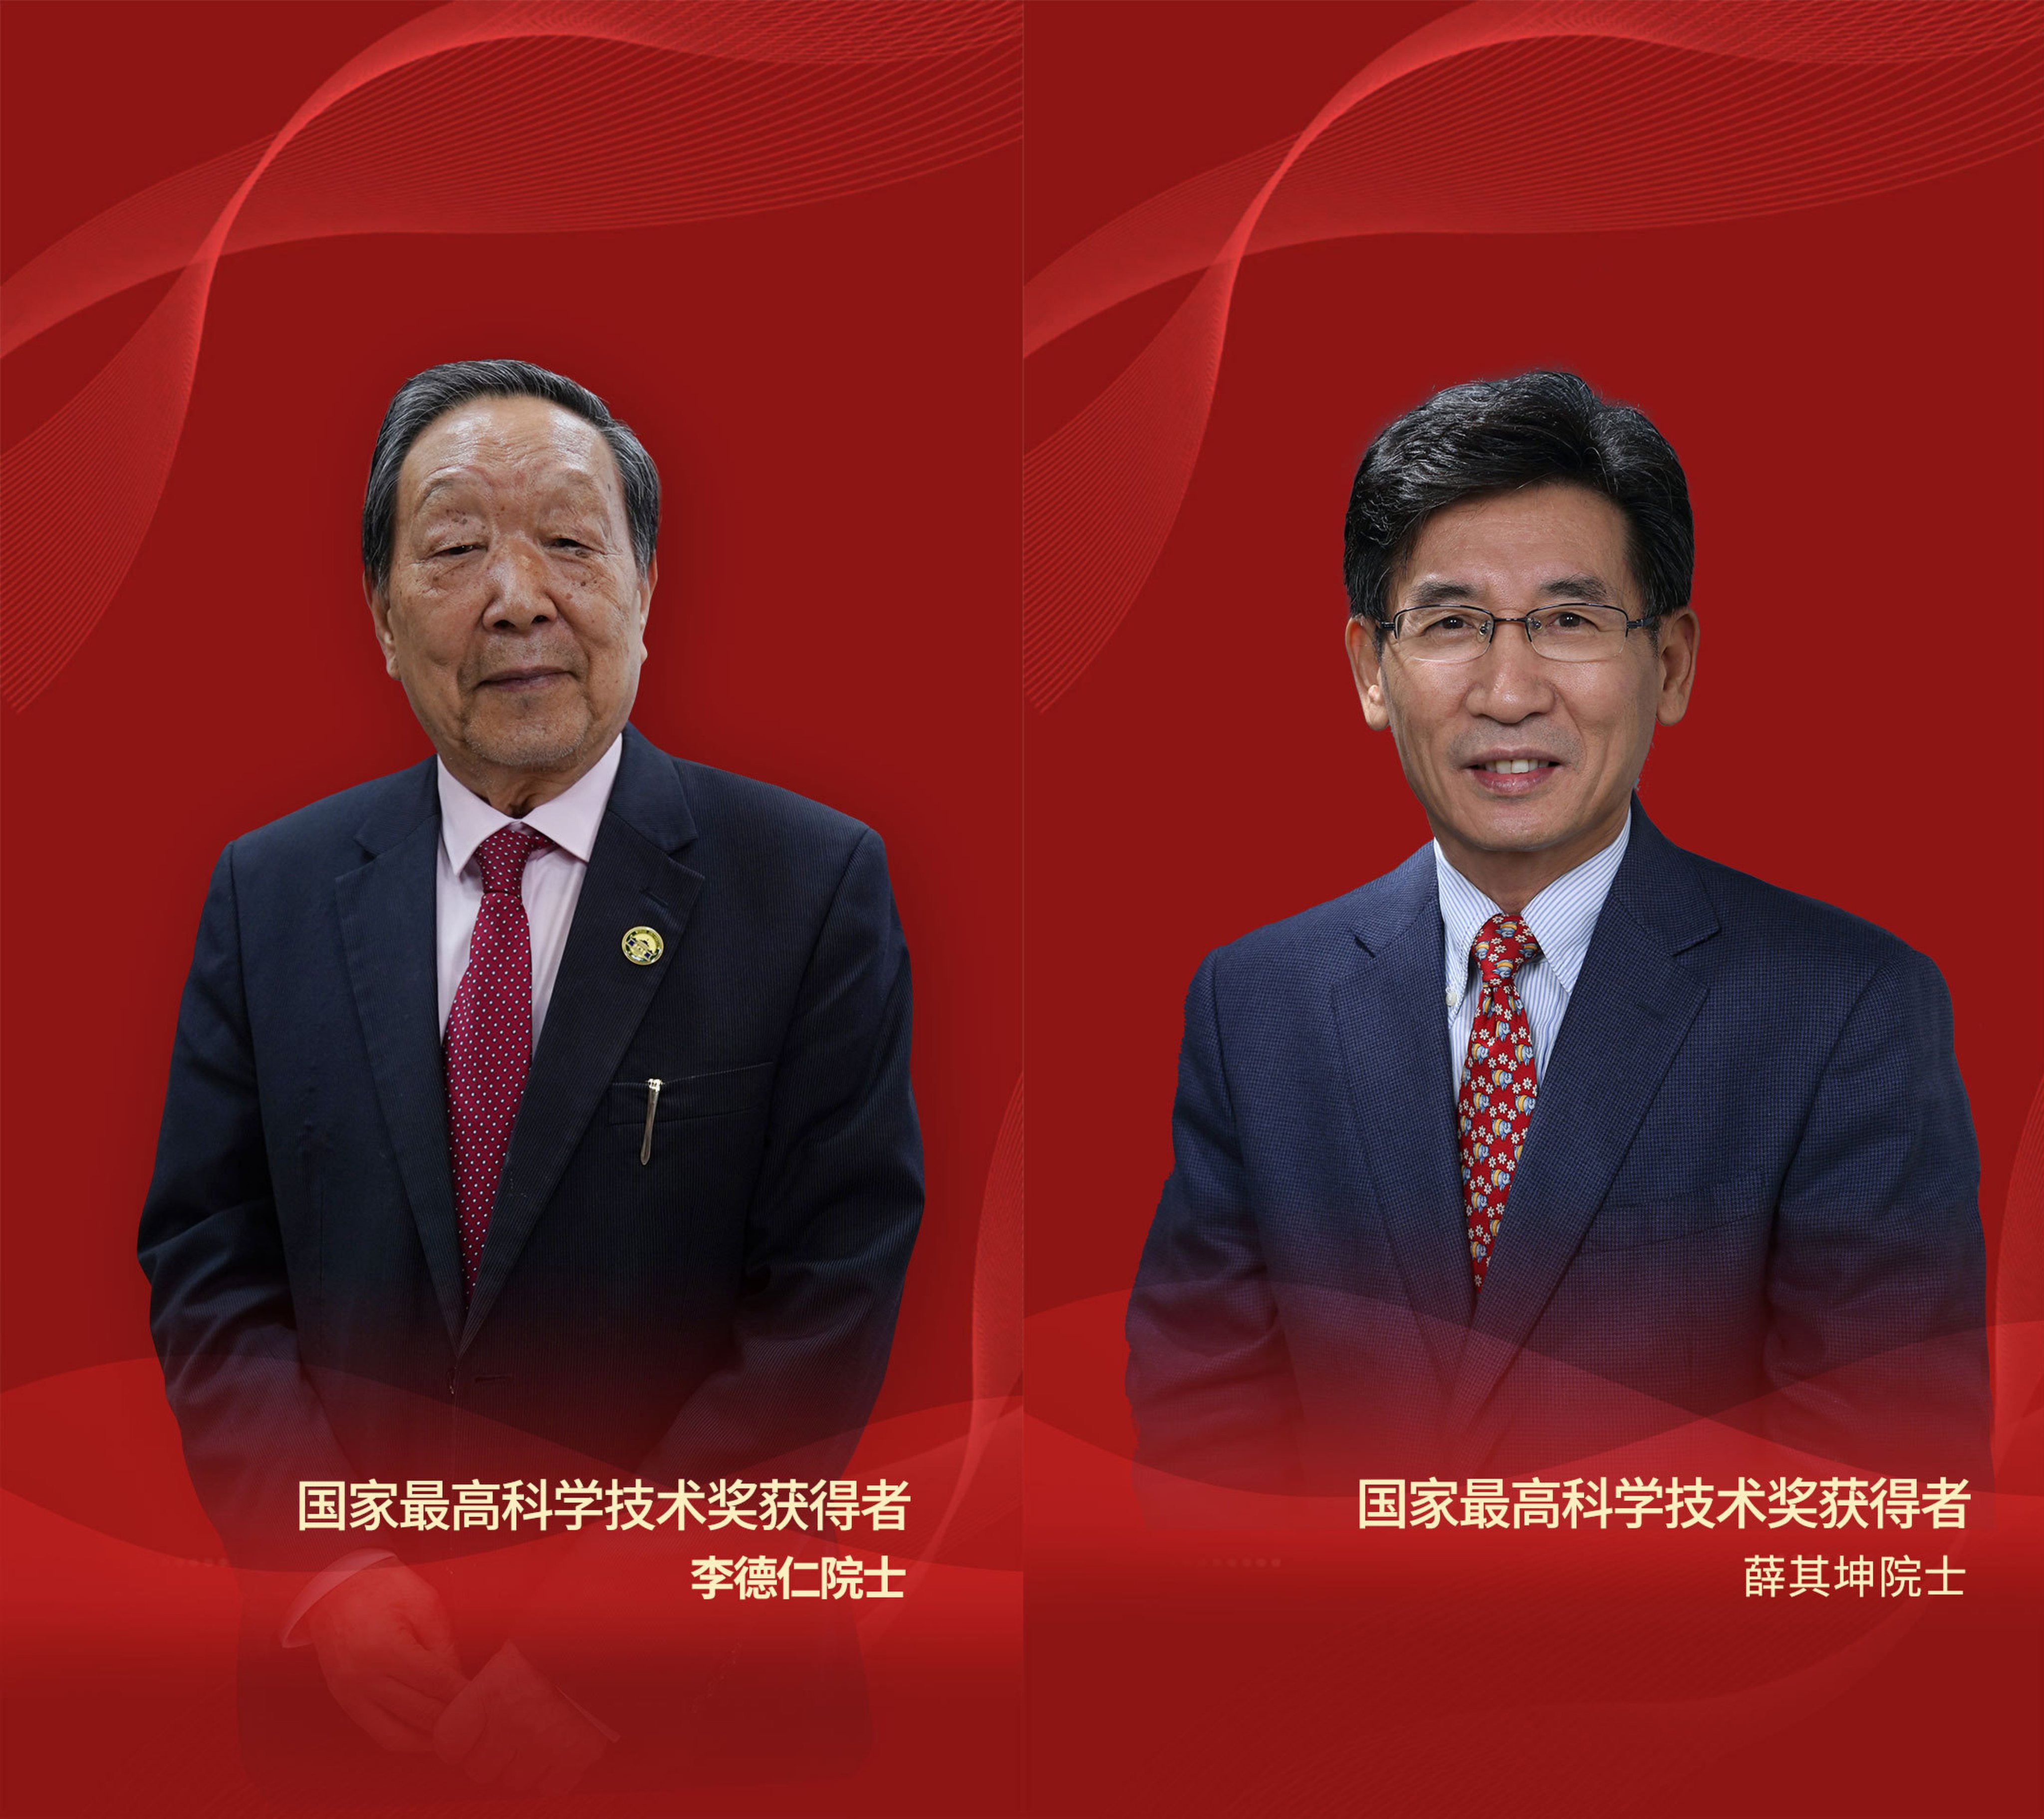 Li Deren (left) and Xue Qikun have been honoured as part of China’s annual National Science and Technology Awards, which have been relaunched after a three-year hiatus. Photo: Handout